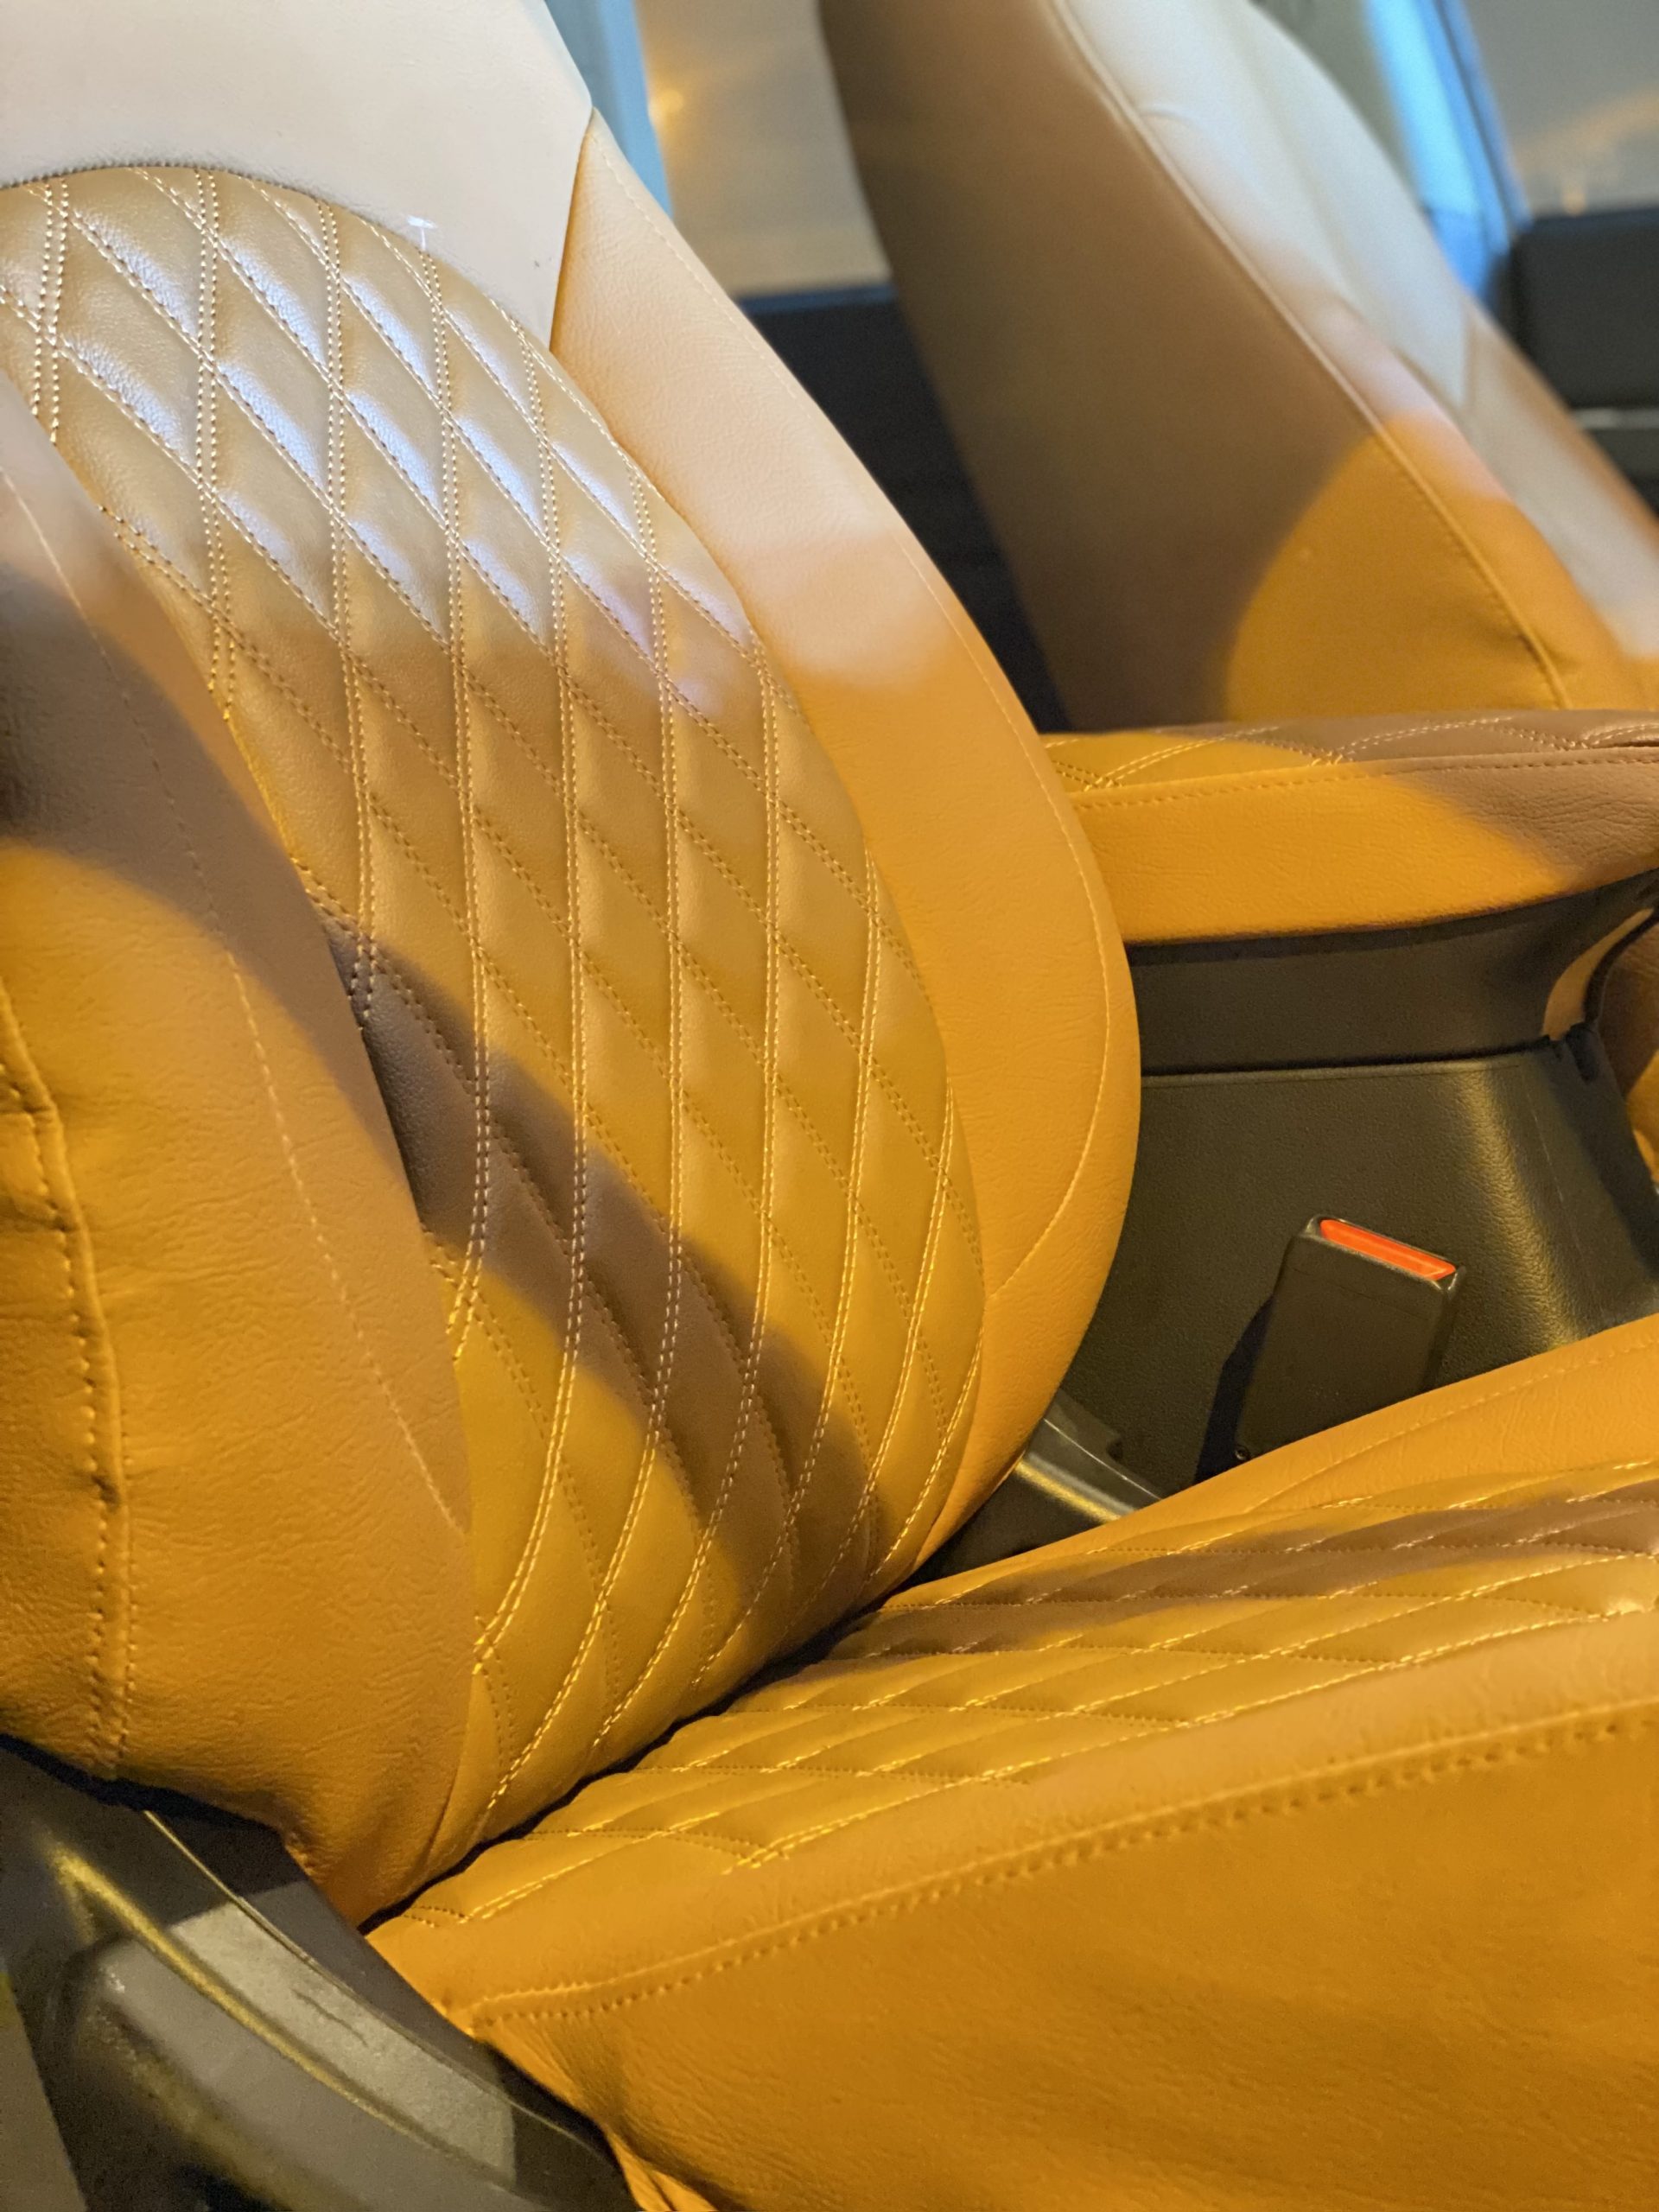 the best cloth seat cover for cars in Qatar.